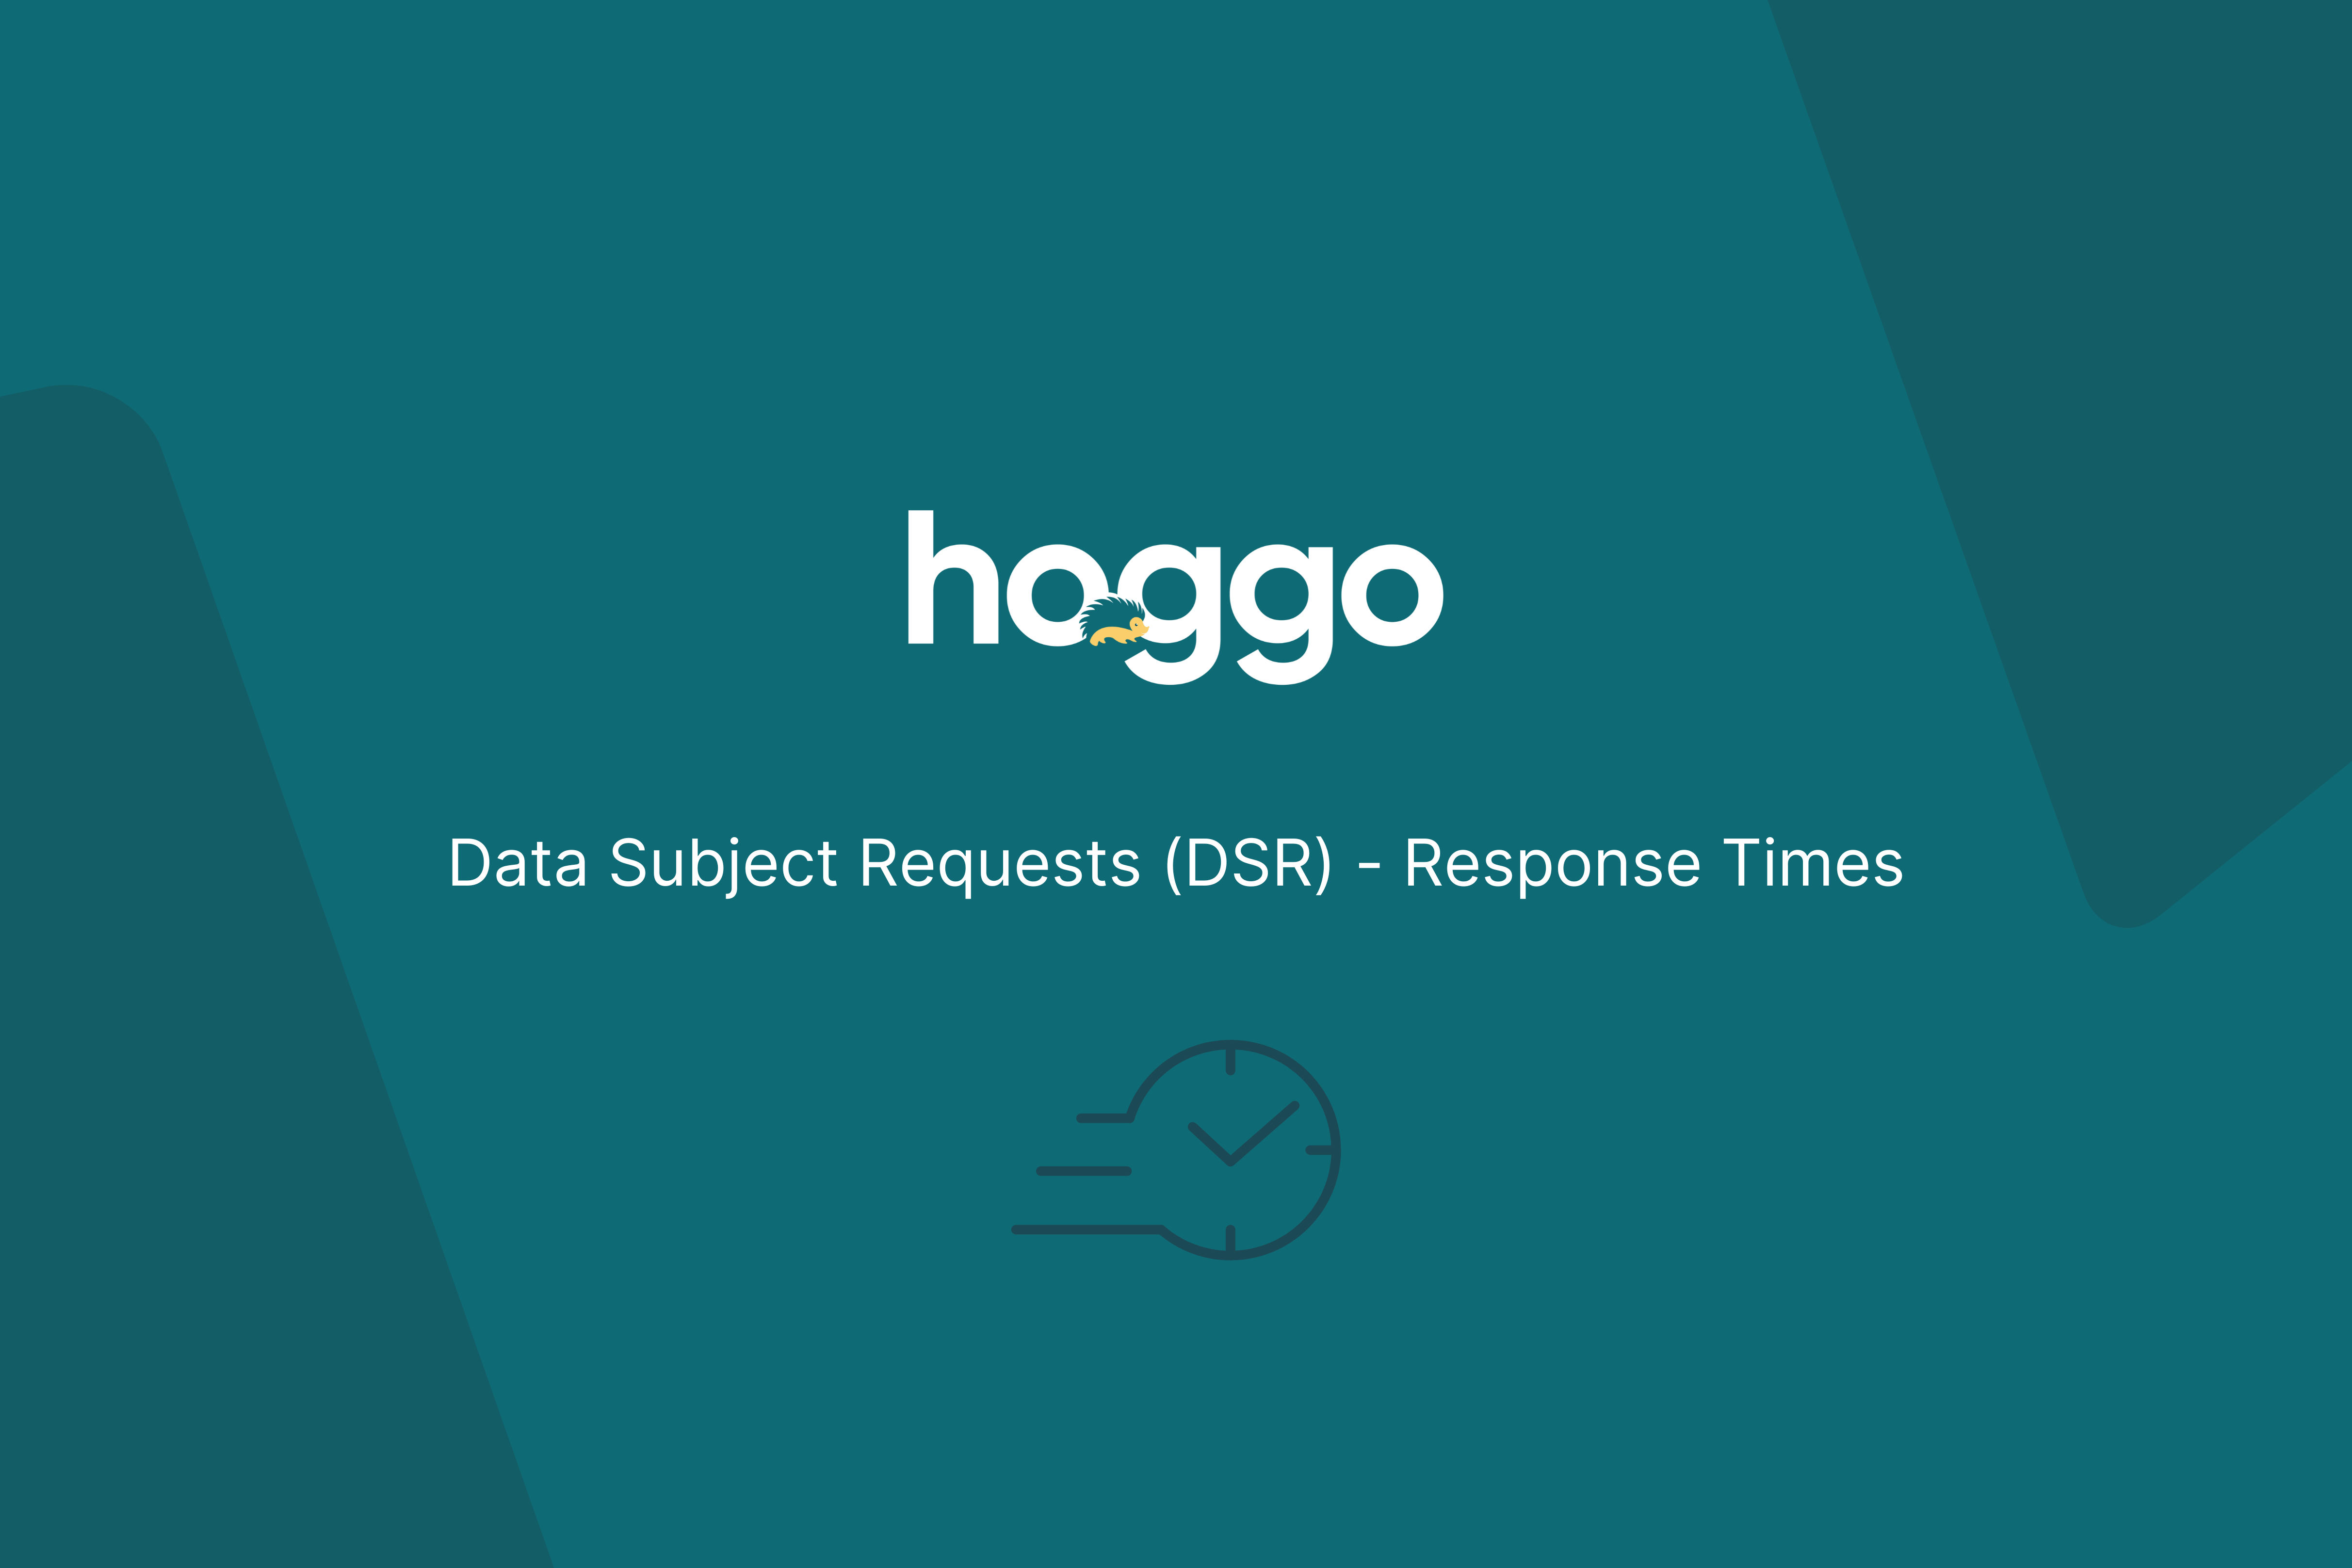 Data Subject Requests response time